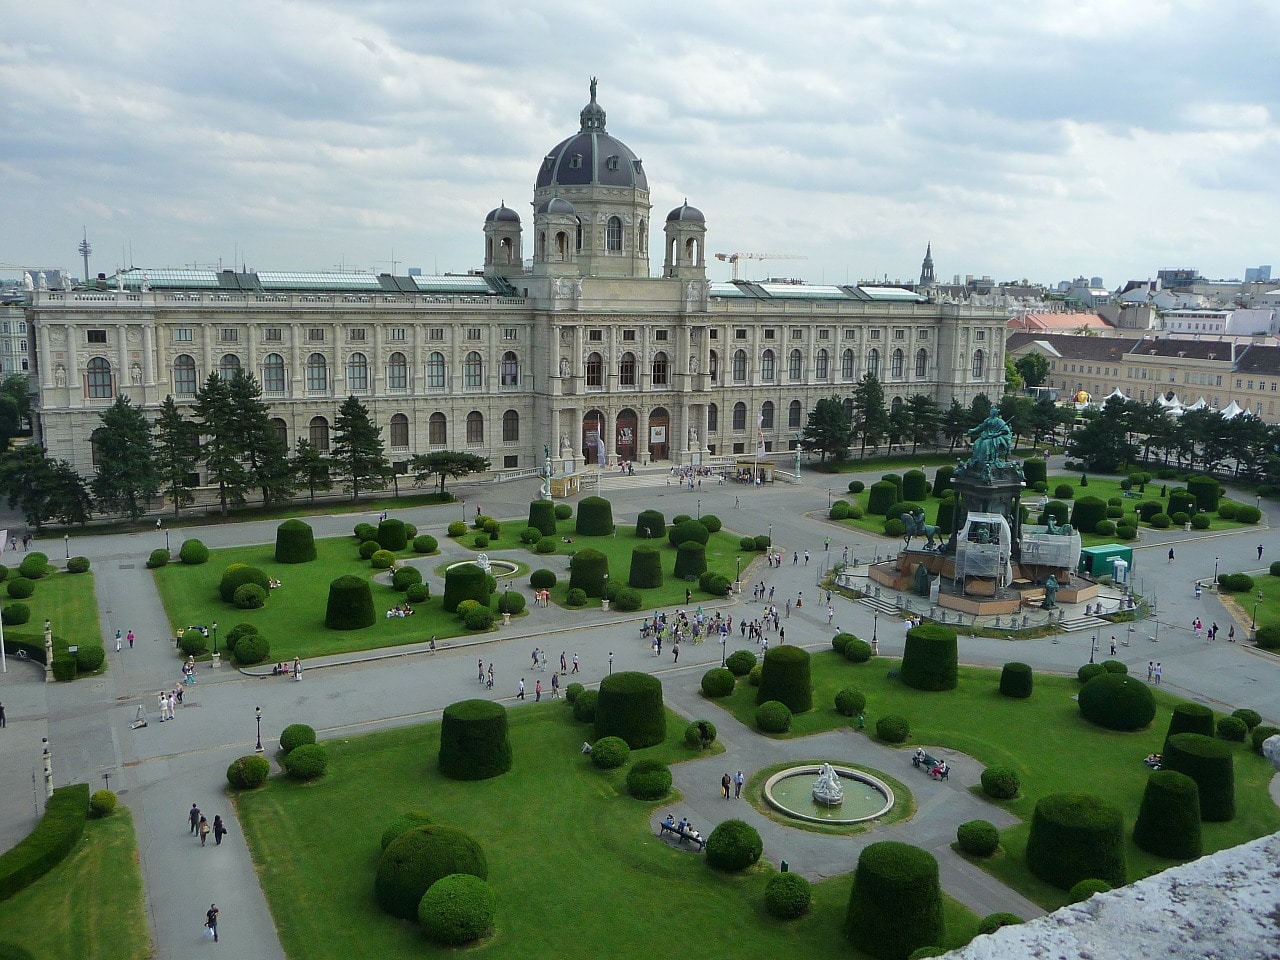 The Art History Museum at Maria-Theresien Platz in Vienna